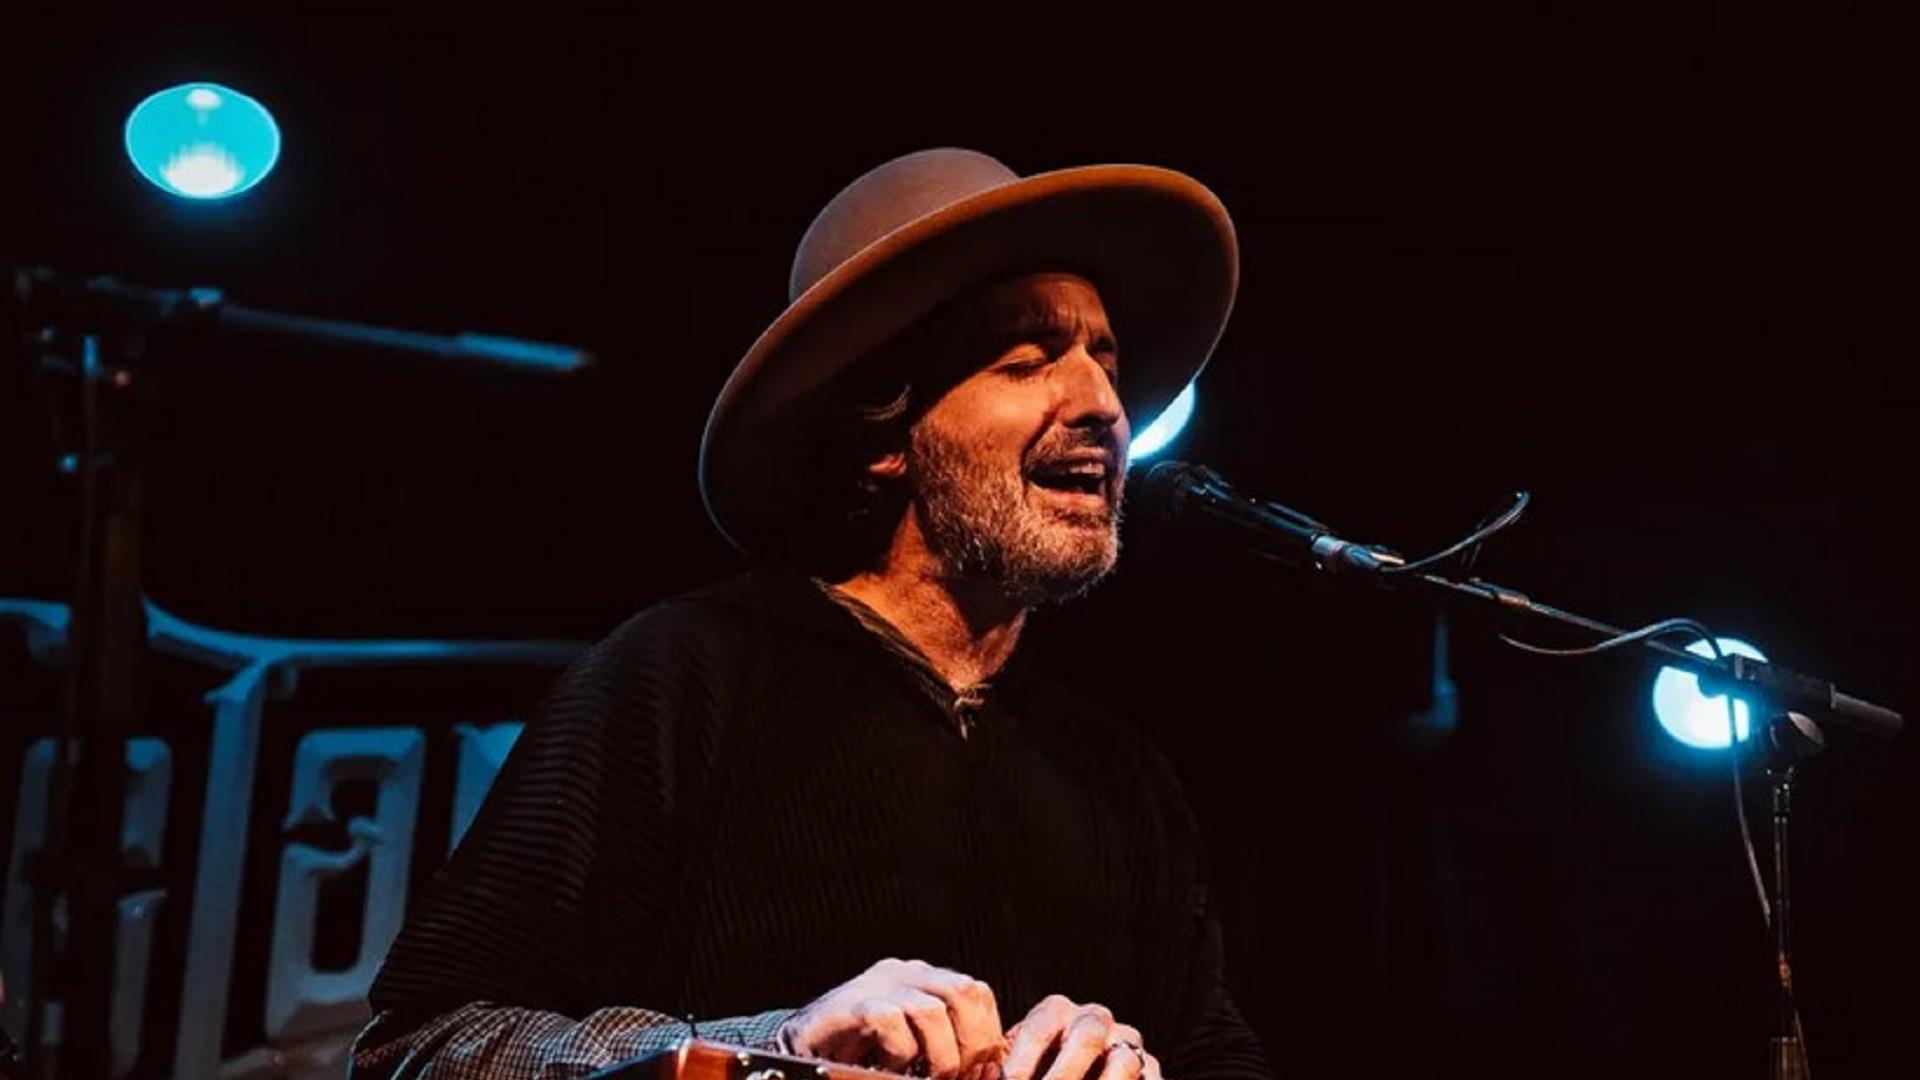 image of musician sitting down singing with eyes closed into microphone.